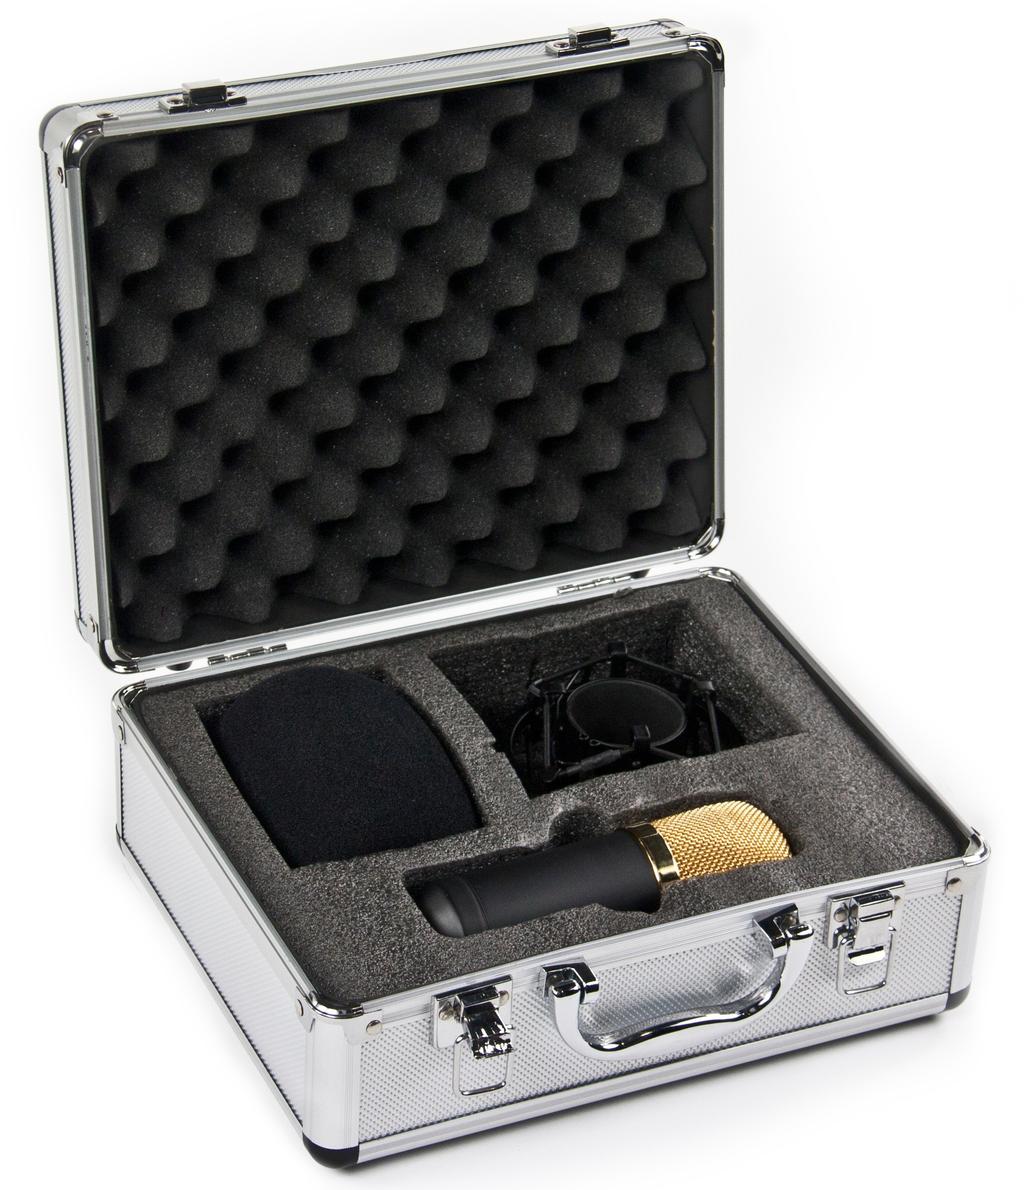 Box contents Box contents: 1x Devine BM-500 microphone 1x black windscreen 1x shockmount 1x storage/transport case with foam inlay Unit and accessory inspection - If the unit is not going to be used